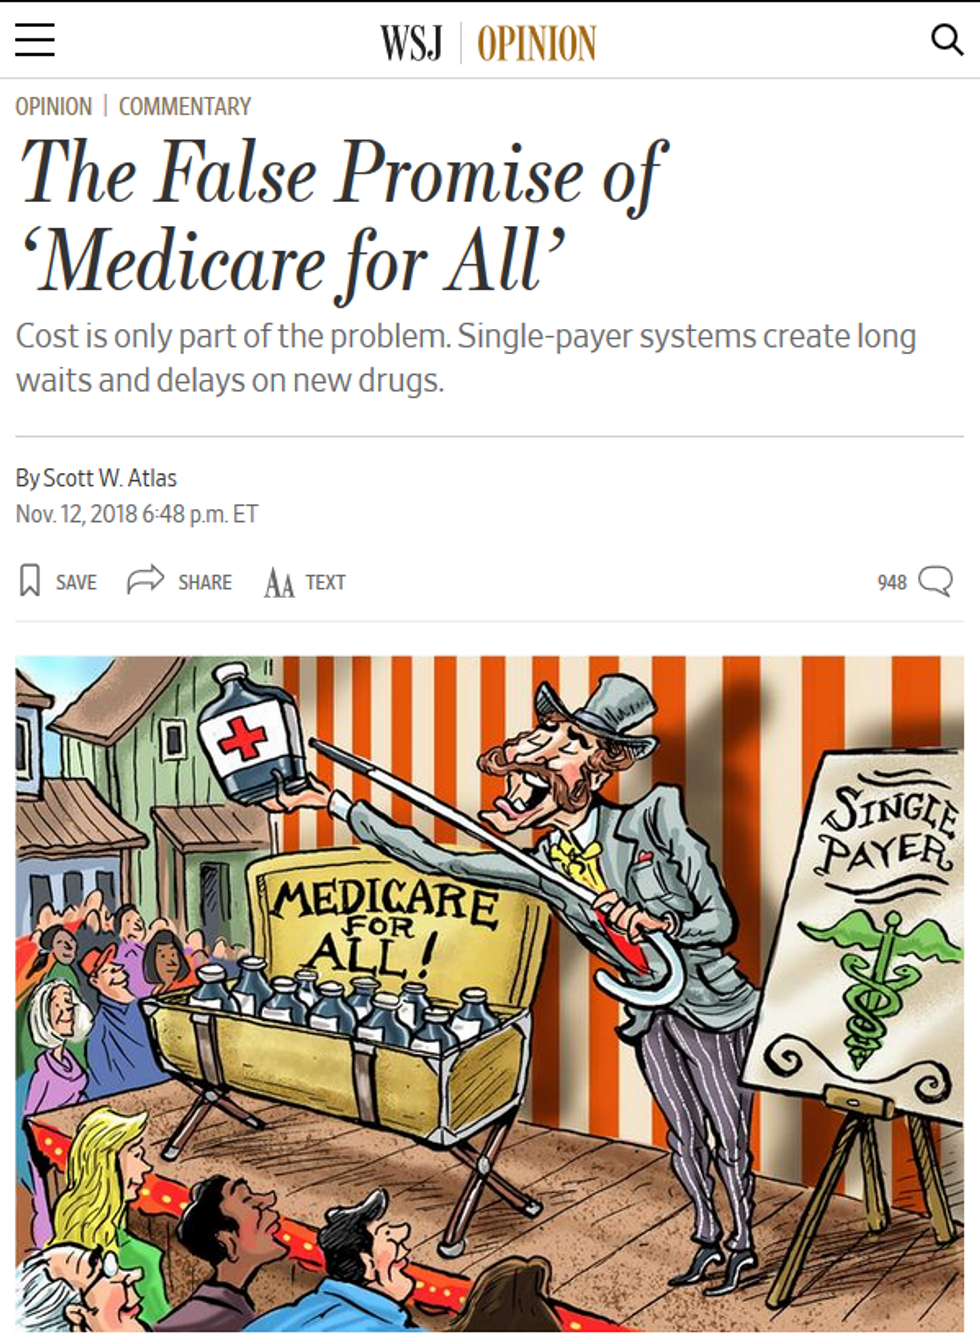 The Wall Street Journal (11/12/19) called Medicare for All a